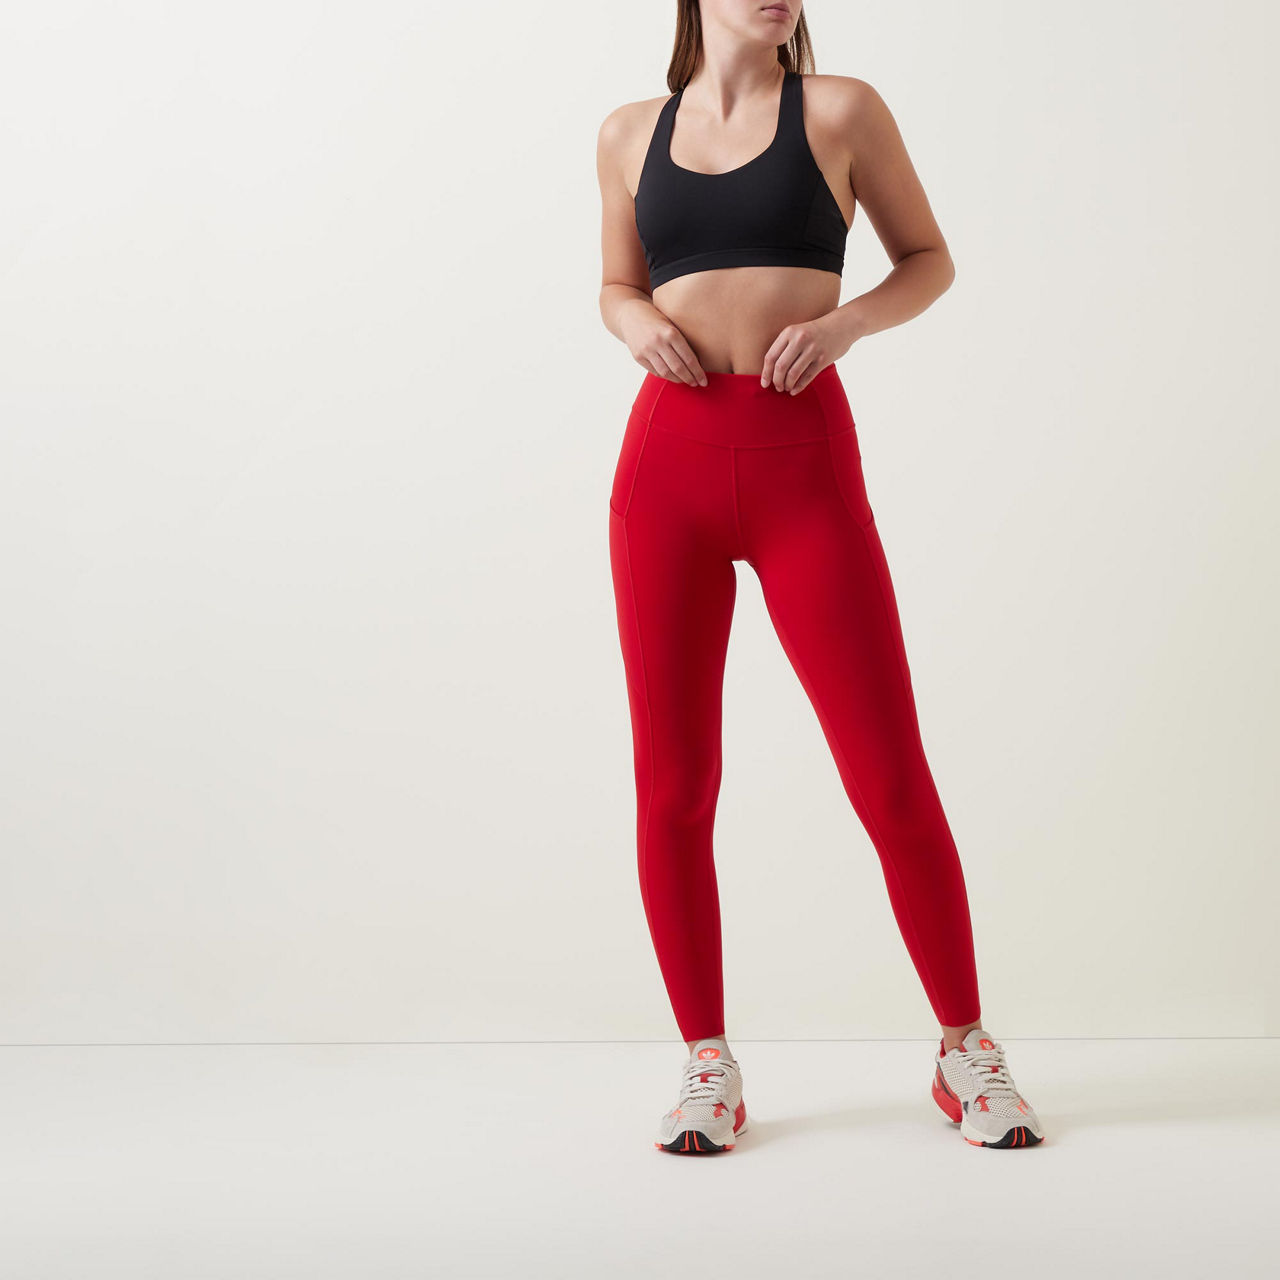 Redbat Leggings available from R179.95, Shop your work from home 🏡  #outfitgoals with Redbat leggings available from R179.95